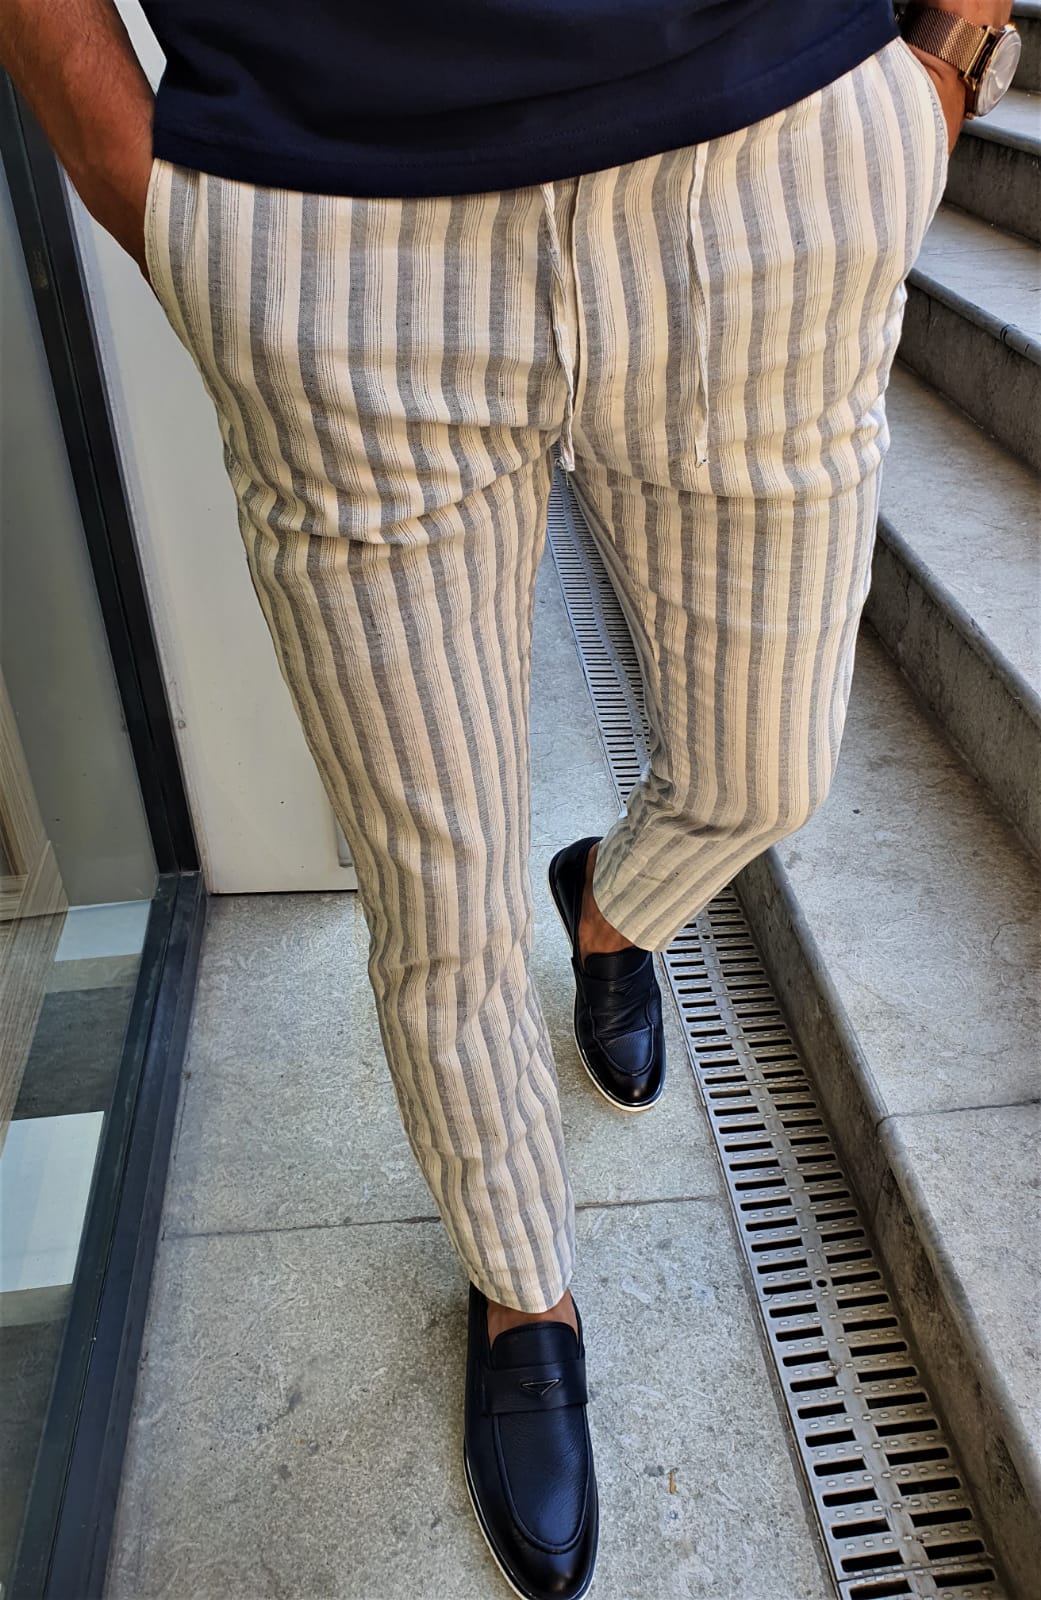 GentWith Newark Navy Blue Slim Fit Laced Striped Linen Pants